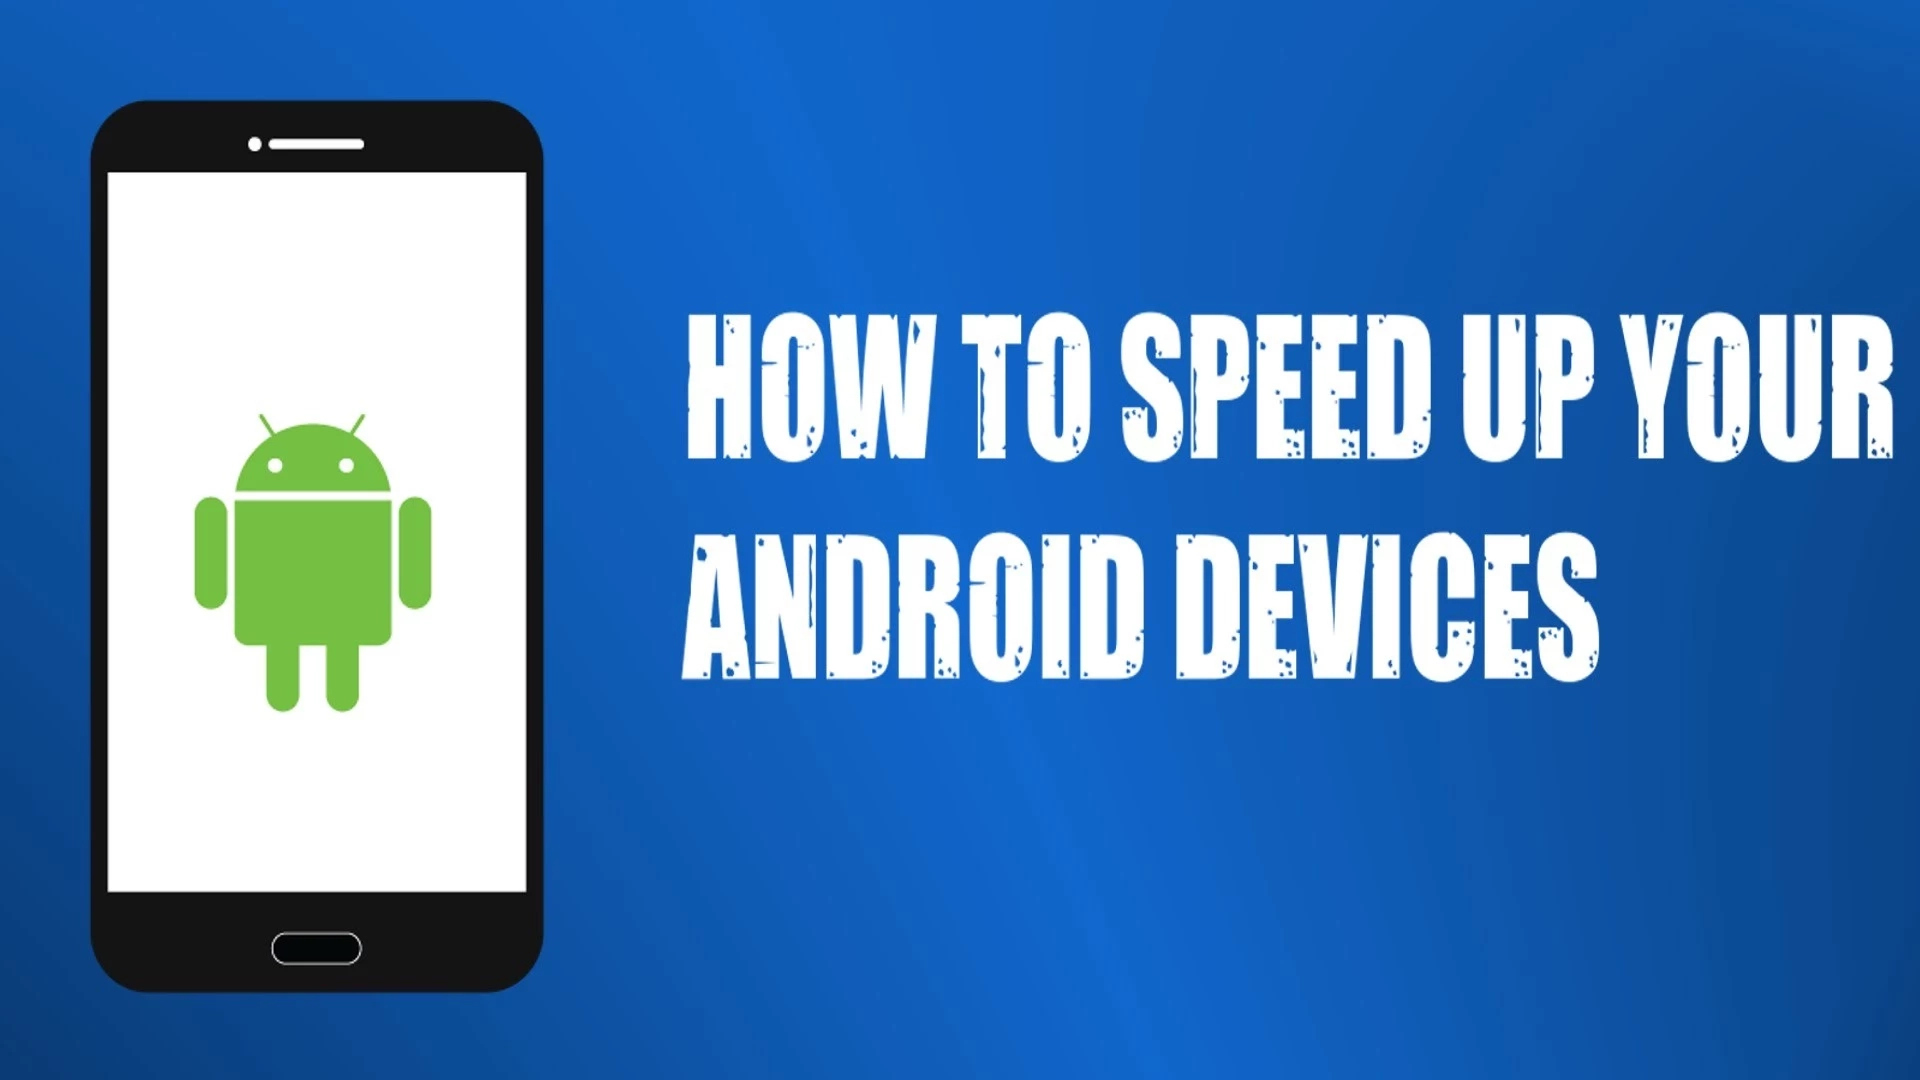 9 Tips To Improve The Speed Of Your Android Phone - Informatioin Guide ...